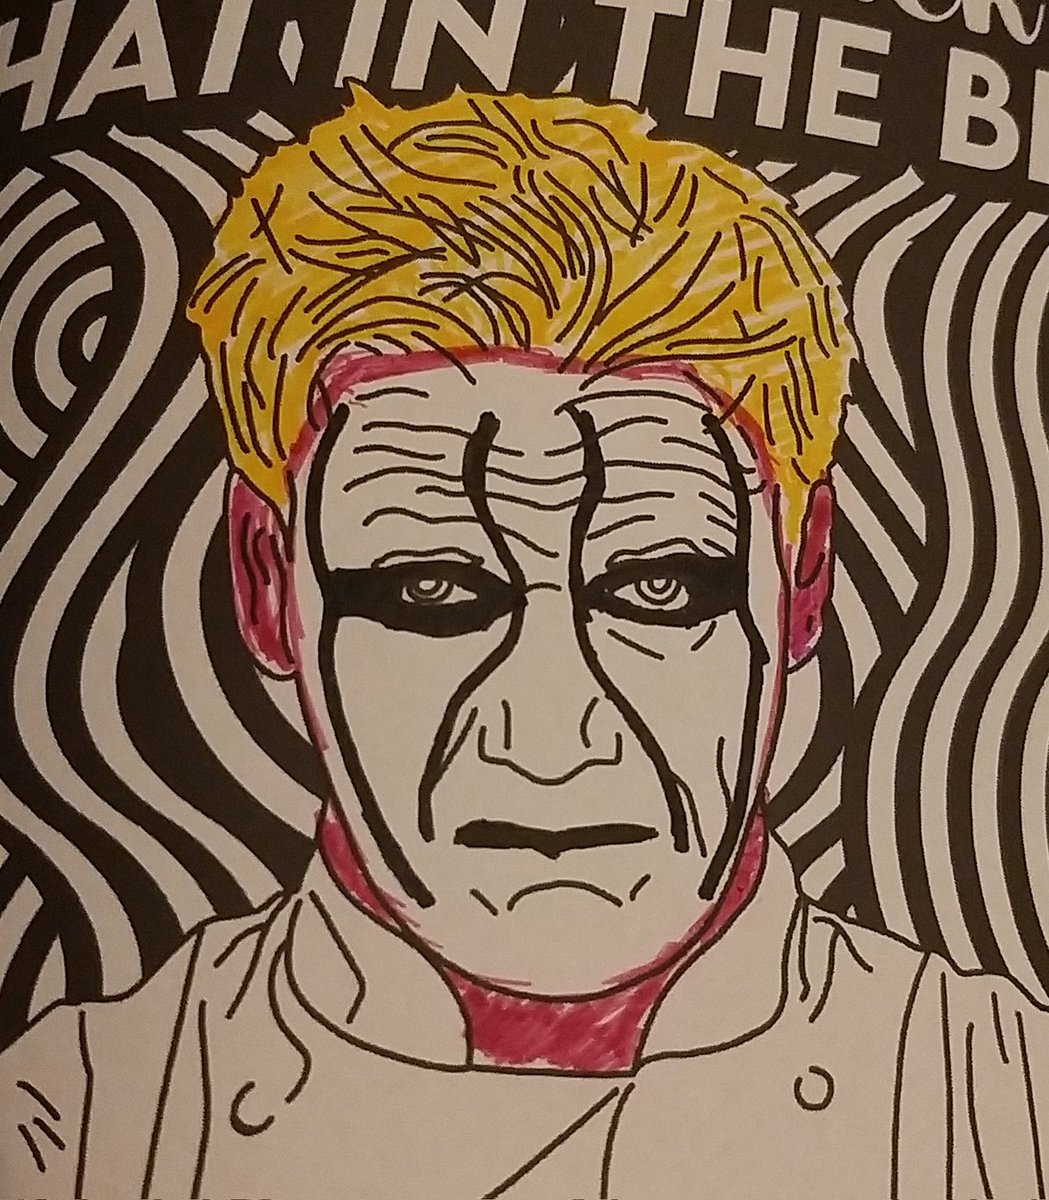 My friends got me a Gordon Ramsay colouring book

So naturally... https://t.co/GbYsGPiT0a